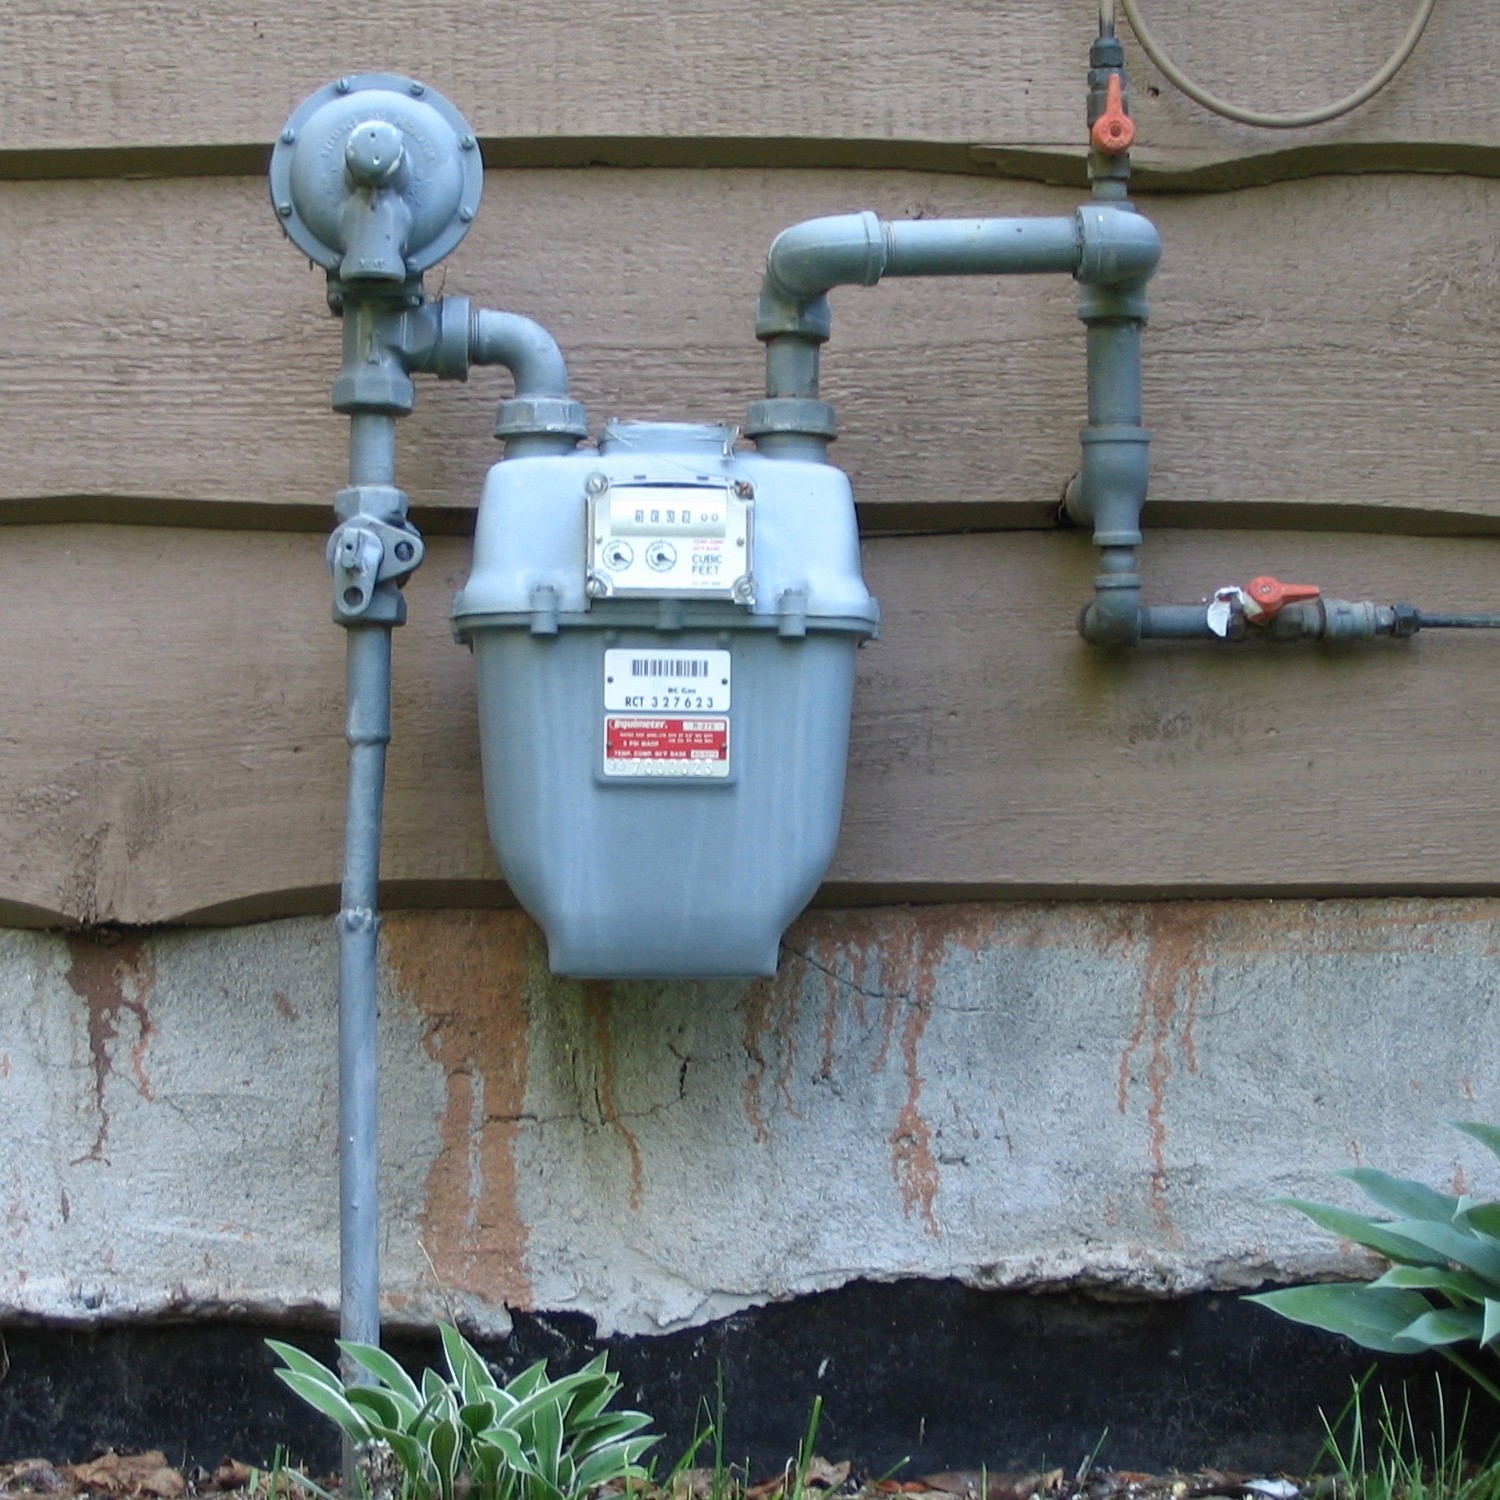 Gas Meter | source wikipedia: https://upload.wikimedia.org/wikipedia/commons/a/a8/Gas_meter.JPG